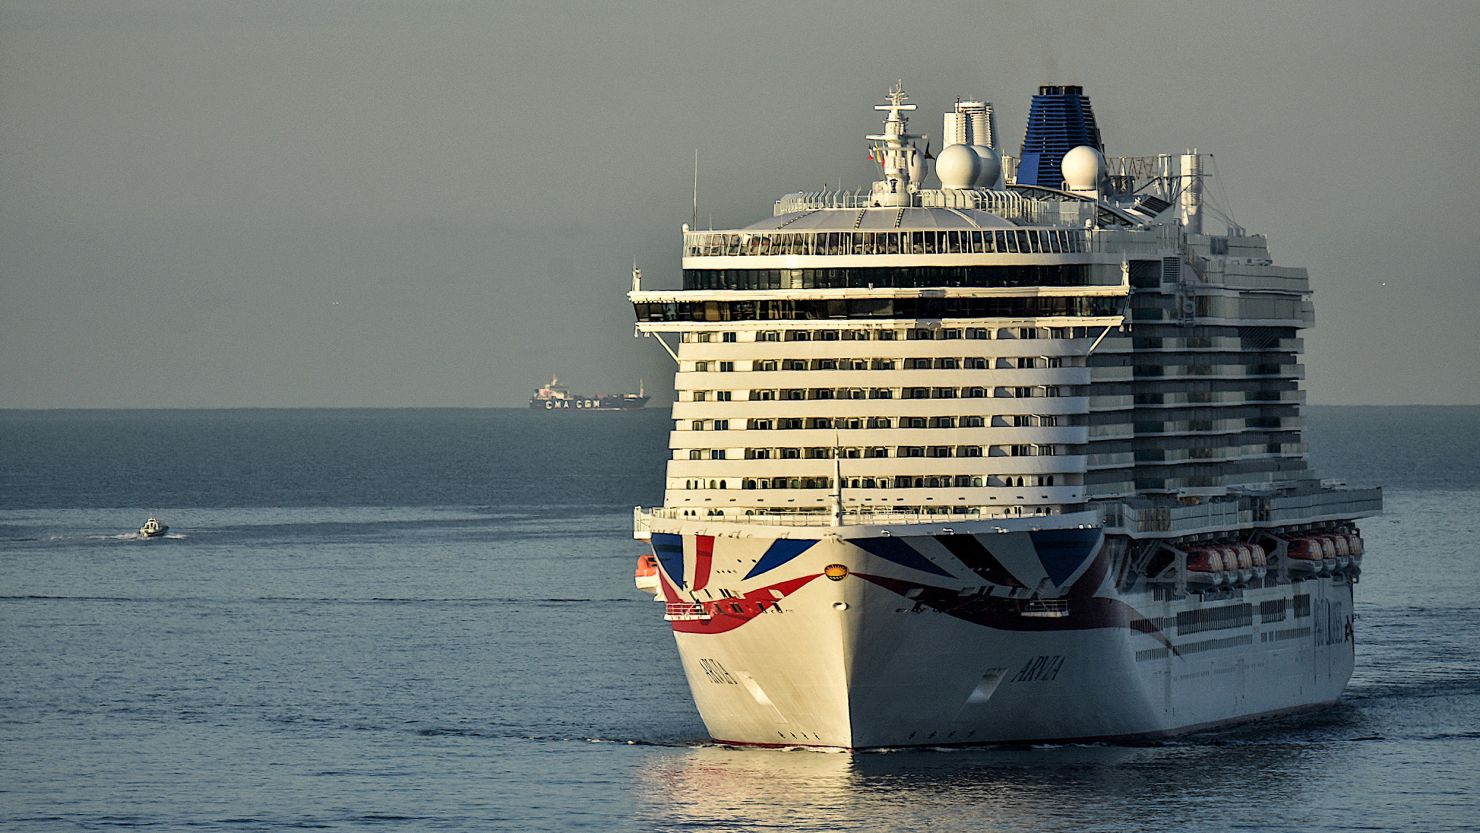 The dream vacation on P&O Cruises' ship Arvia (file photo) turned into a nightmare on the flight home.